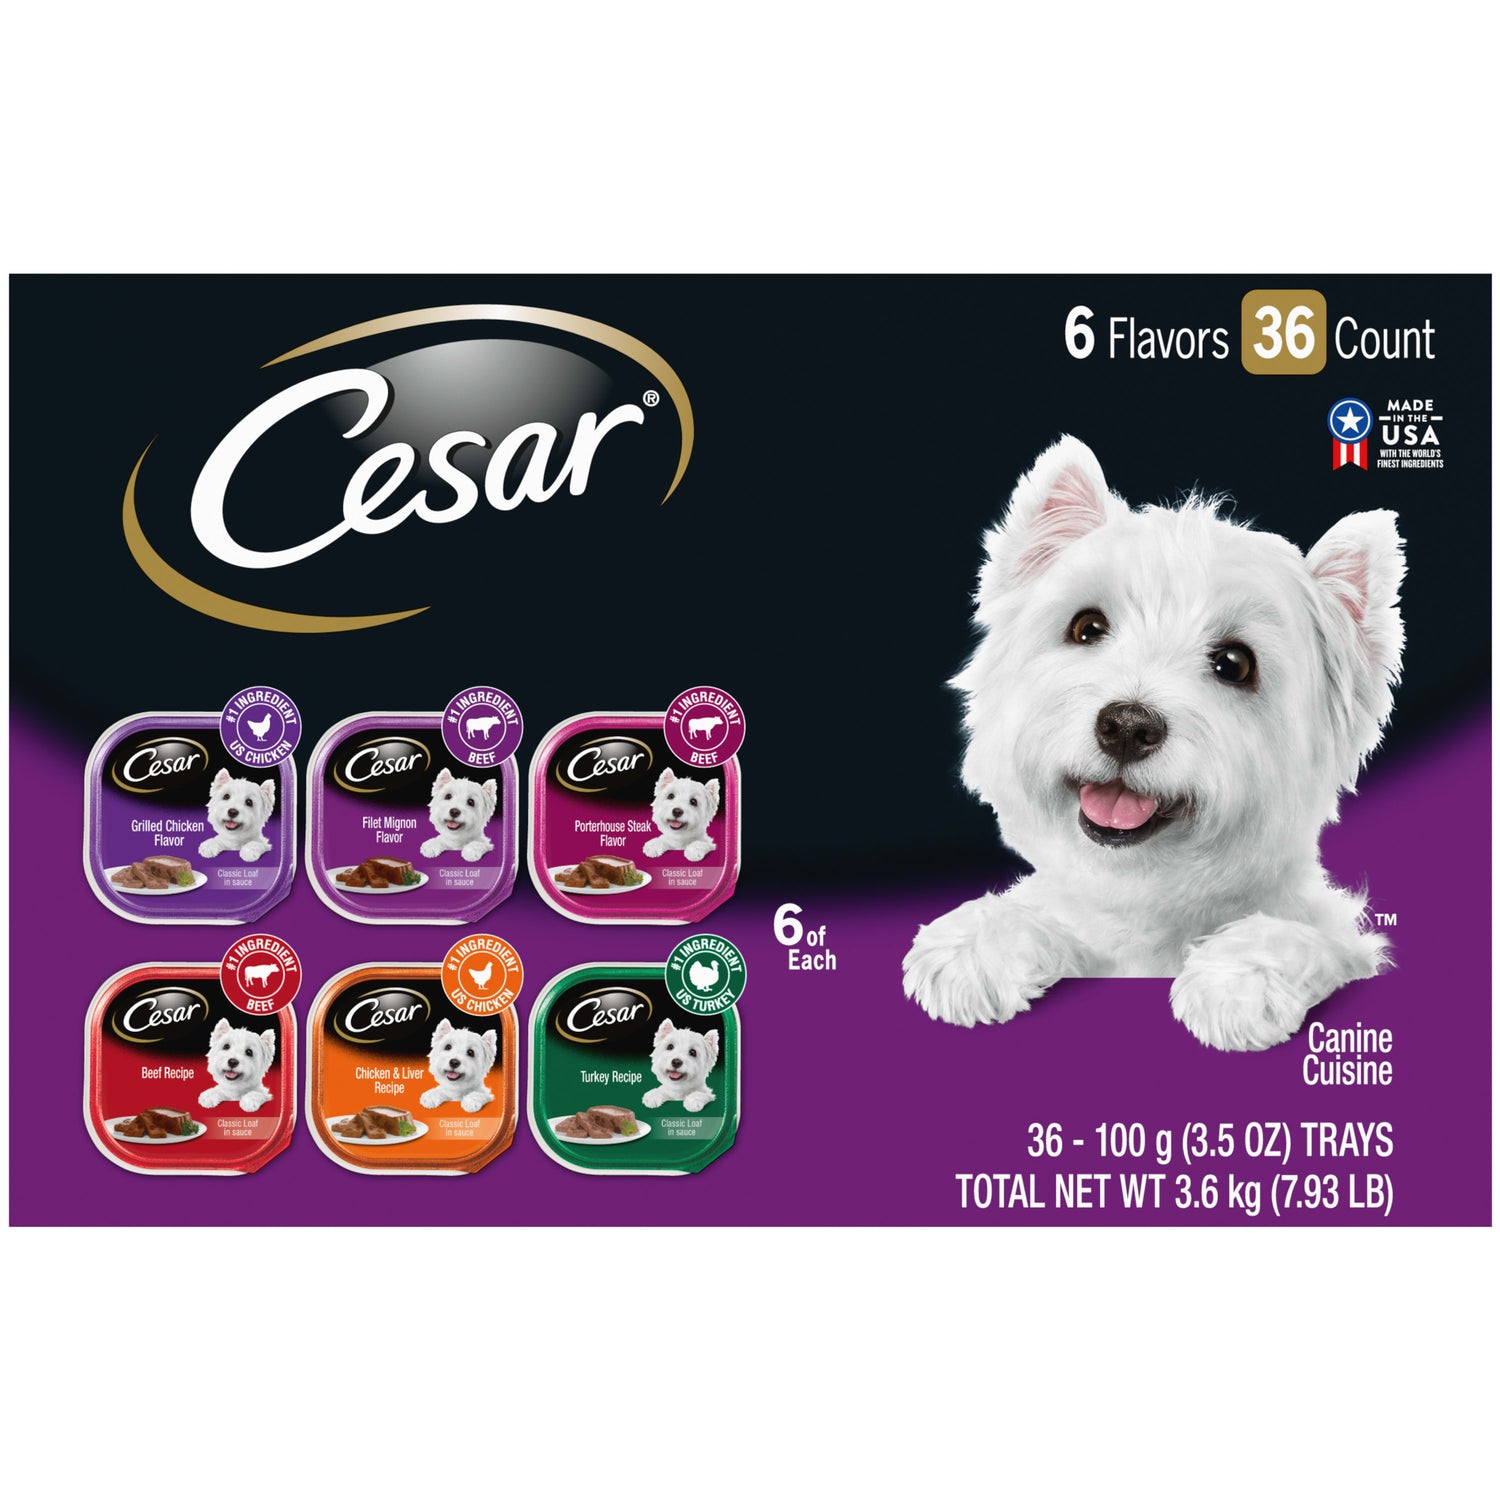 CESAR Soft Wet Dog Food Classic Loaf in Sauce Grilled Chicken, Filet Mignon, Porterhouse Steak, Beef, Chicken & Liver and Turkey Variety Pack (36) 3.5 Oz. Easy Peel Trays